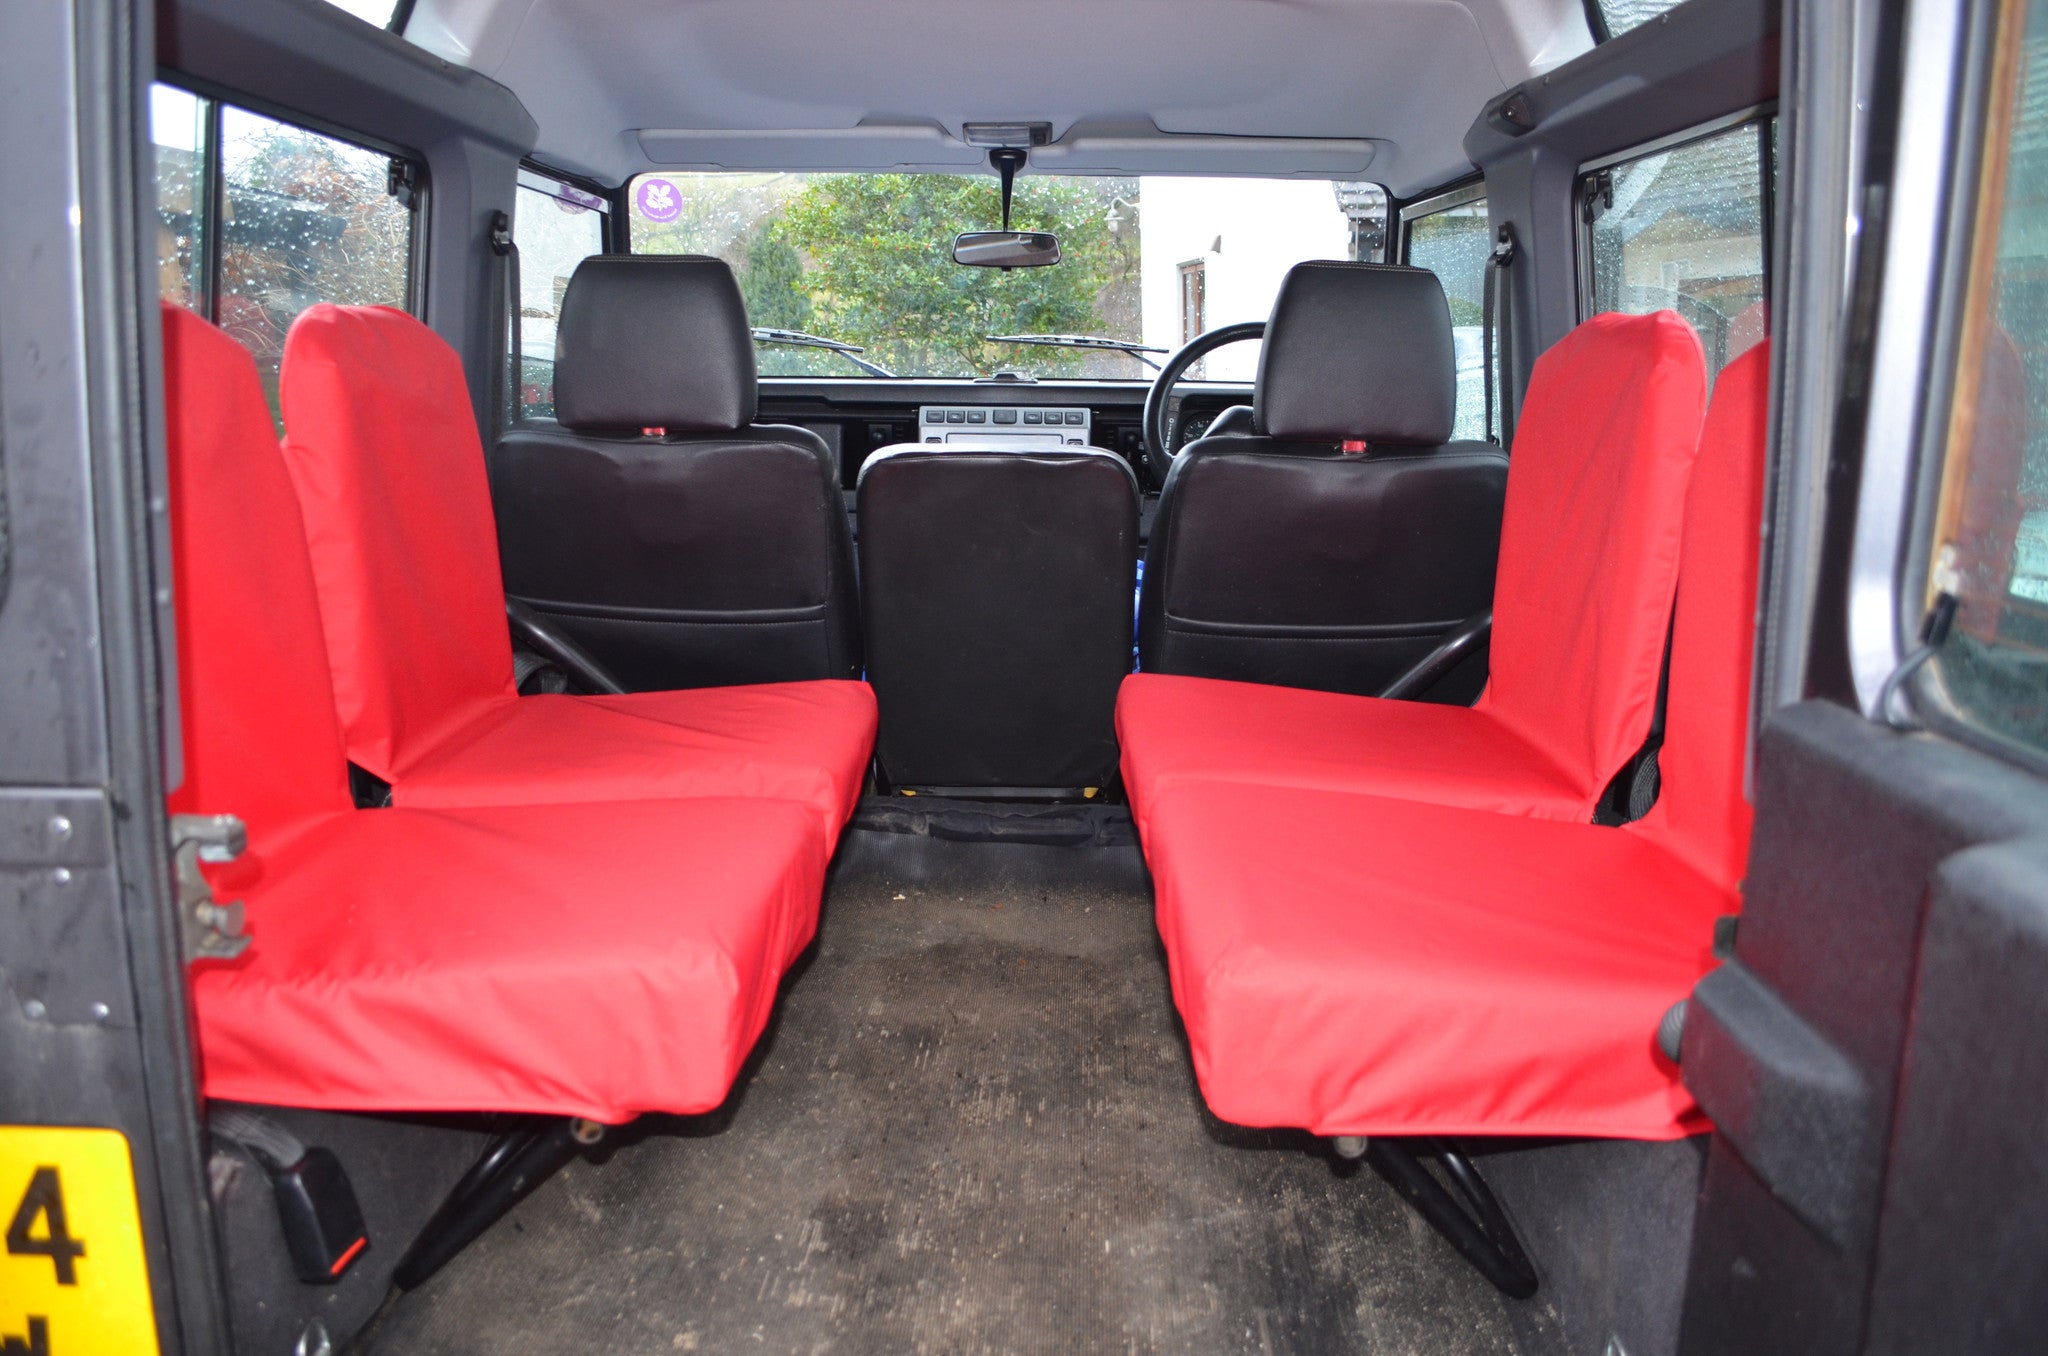 Land Rover Defender 1983 - 2007 Rear Seat Covers Set of 4 Dicky Seats / Red Turtle Covers Ltd